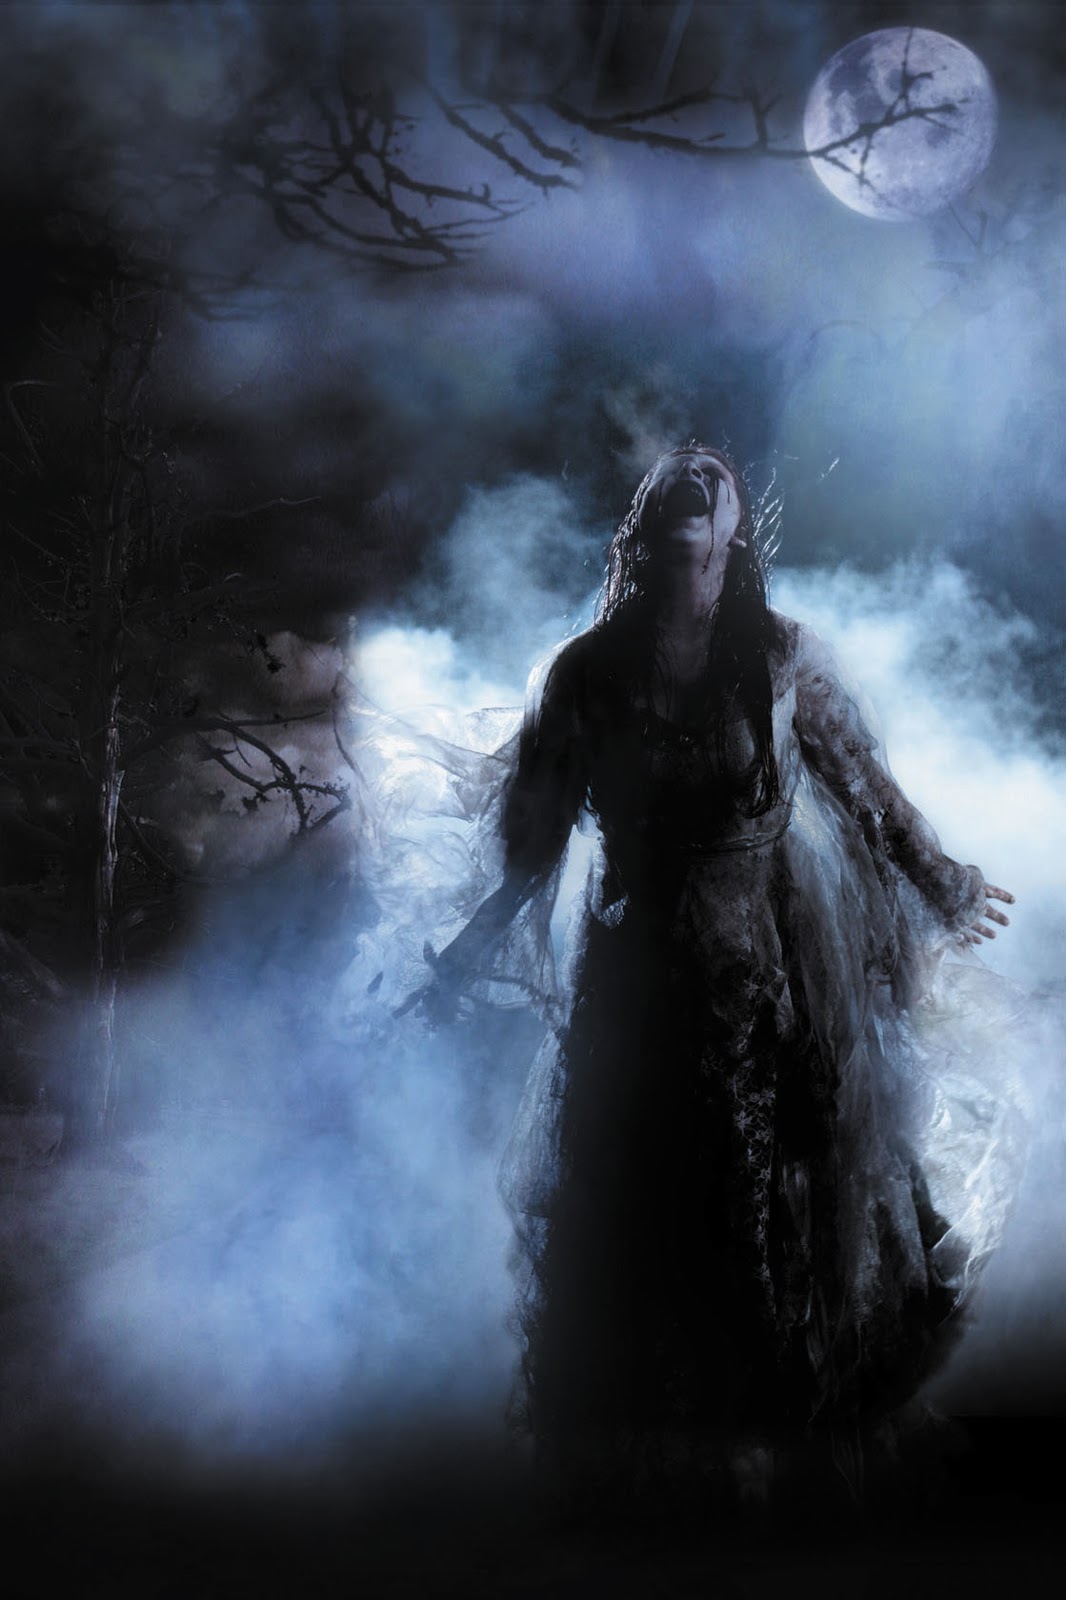 Banshee (bean-sidhe) means 'Faerie woman' or 'woman of the Faerie mound'. Many legends exist surrounding the Banshees and just how evil is she meant to be.